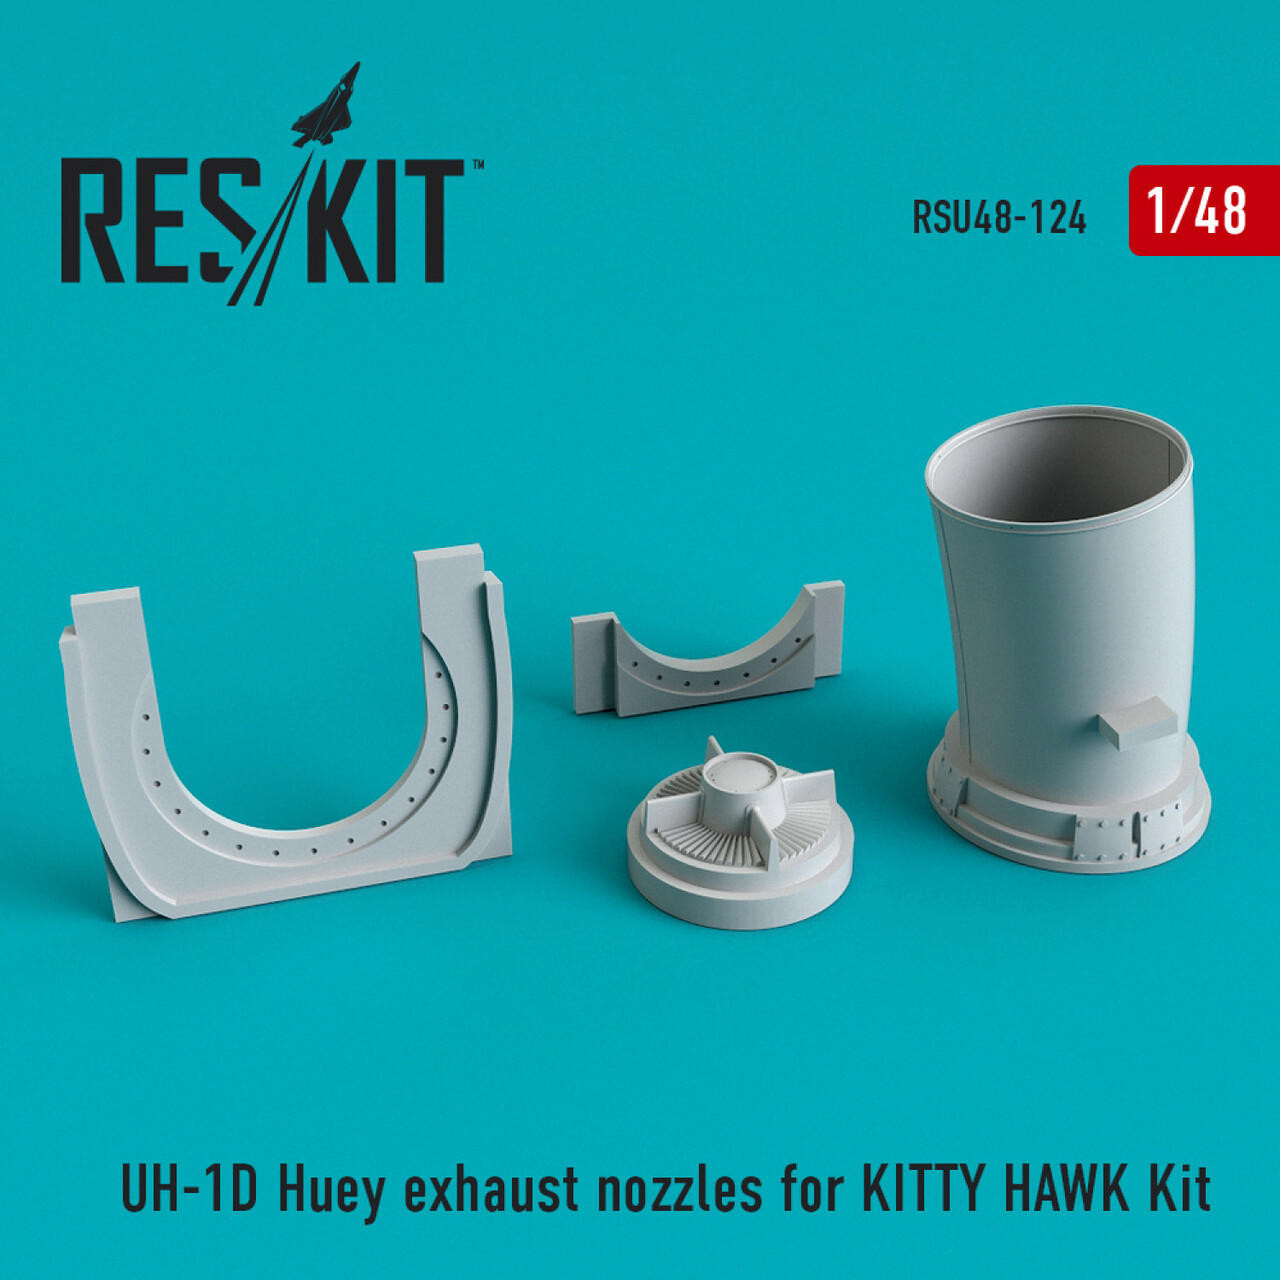 RES-RSU48-0124 1/48 Reskit UH-1D Huey exhaust nozzles for KITTY HAWK Kit 1/48 MMD Squadron